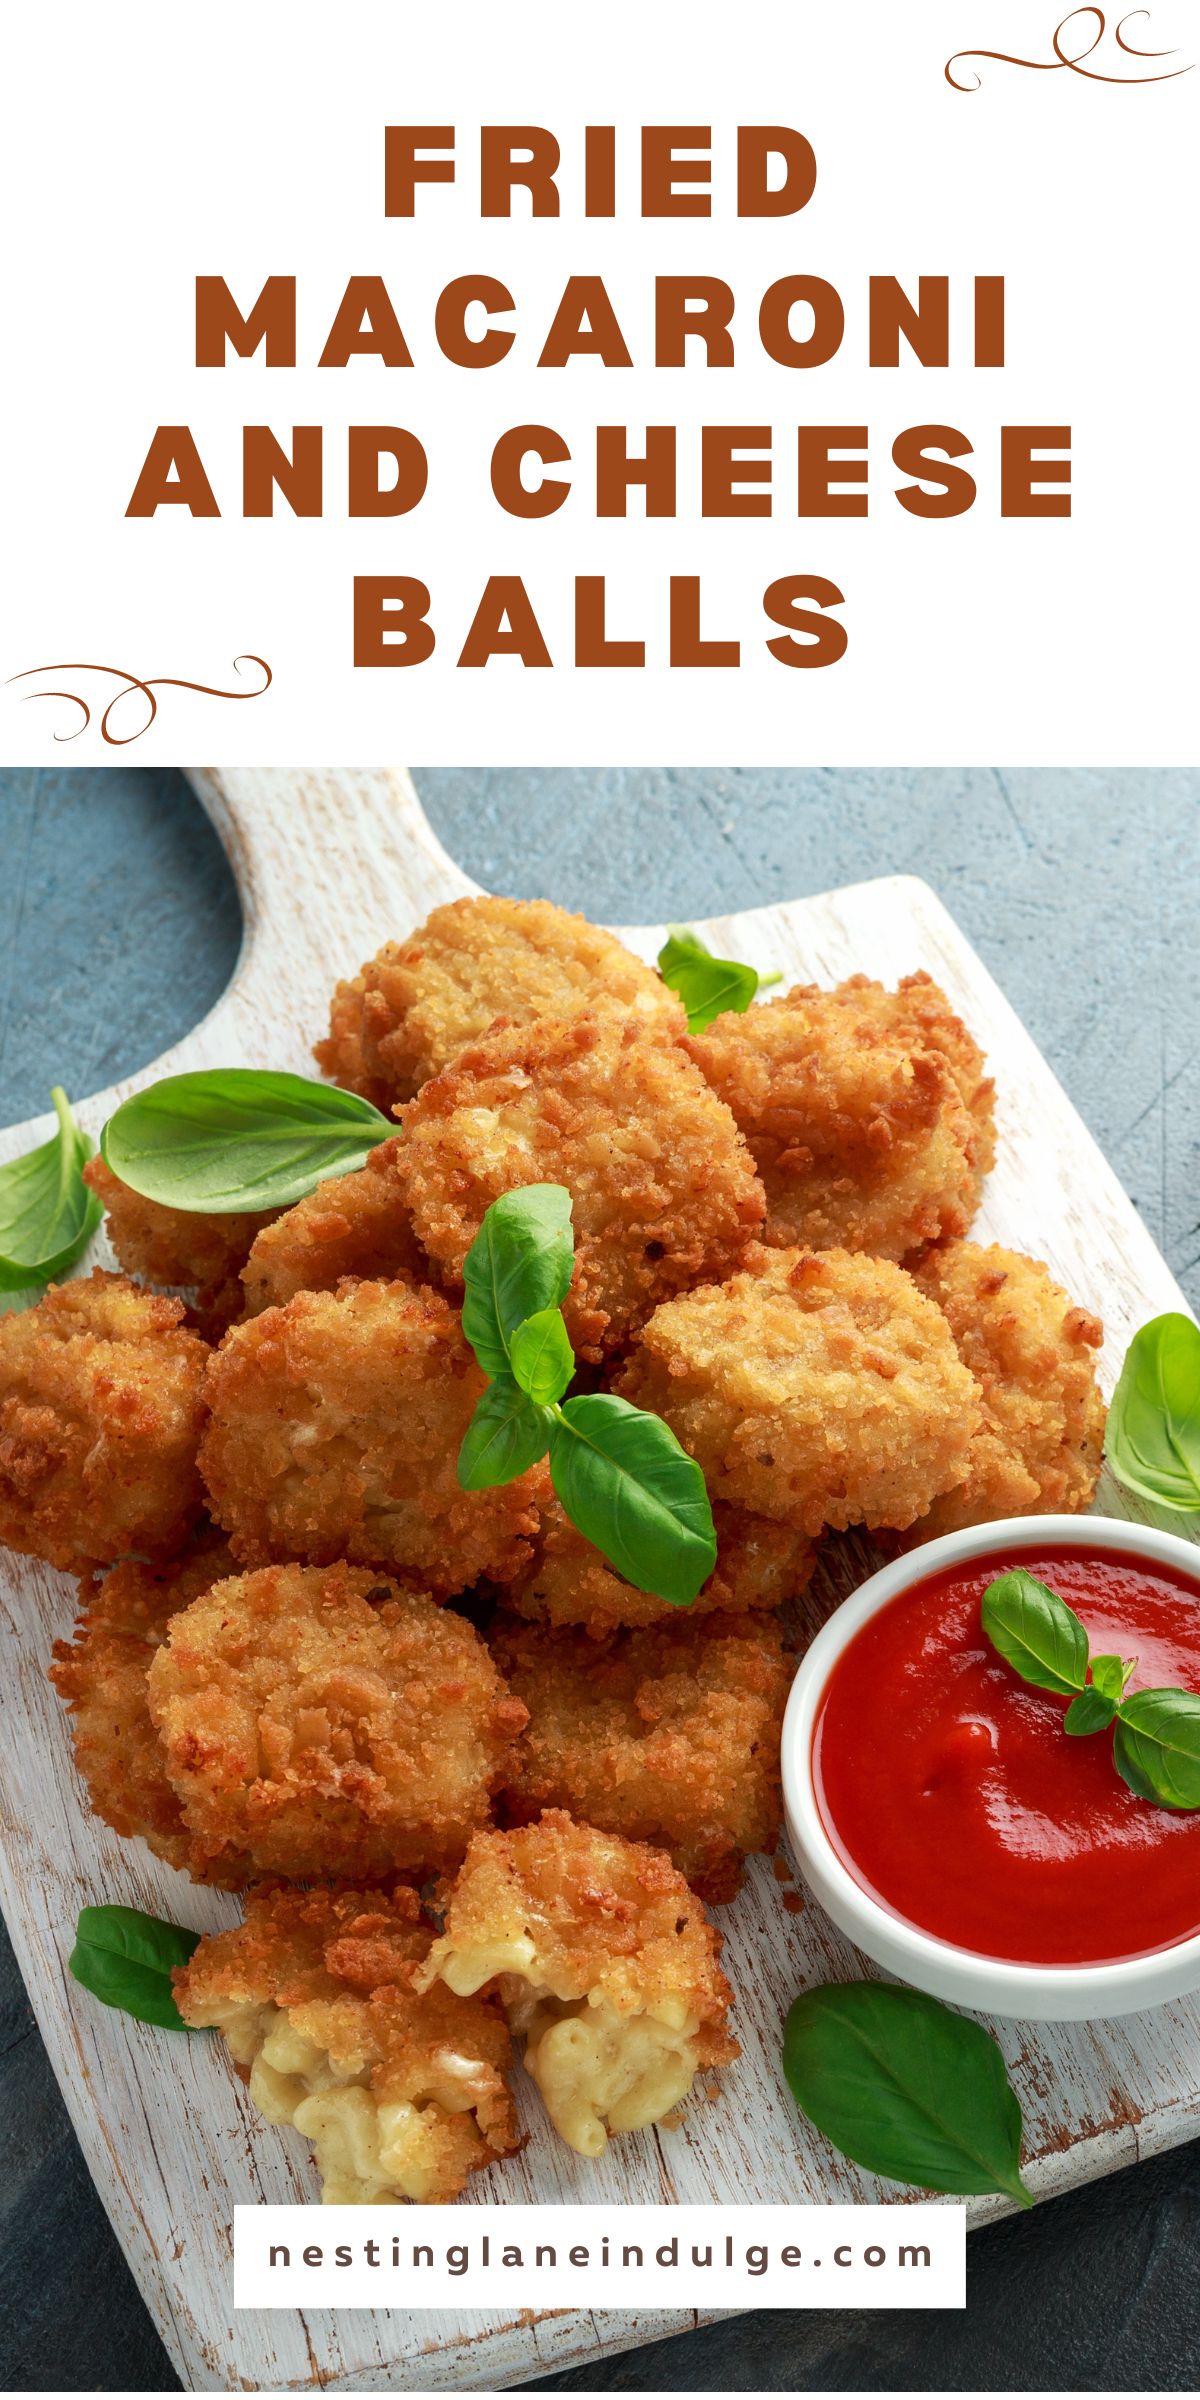 A Pinterest-style image showcasing 'Fried Macaroni and Cheese Balls' with a bold title at the top in large orange font. Below, a white wooden board presents golden fried mac and cheese balls with fresh basil and a bowl of red sauce. The website 'nestinglaneindulge.com' is featured at the bottom.